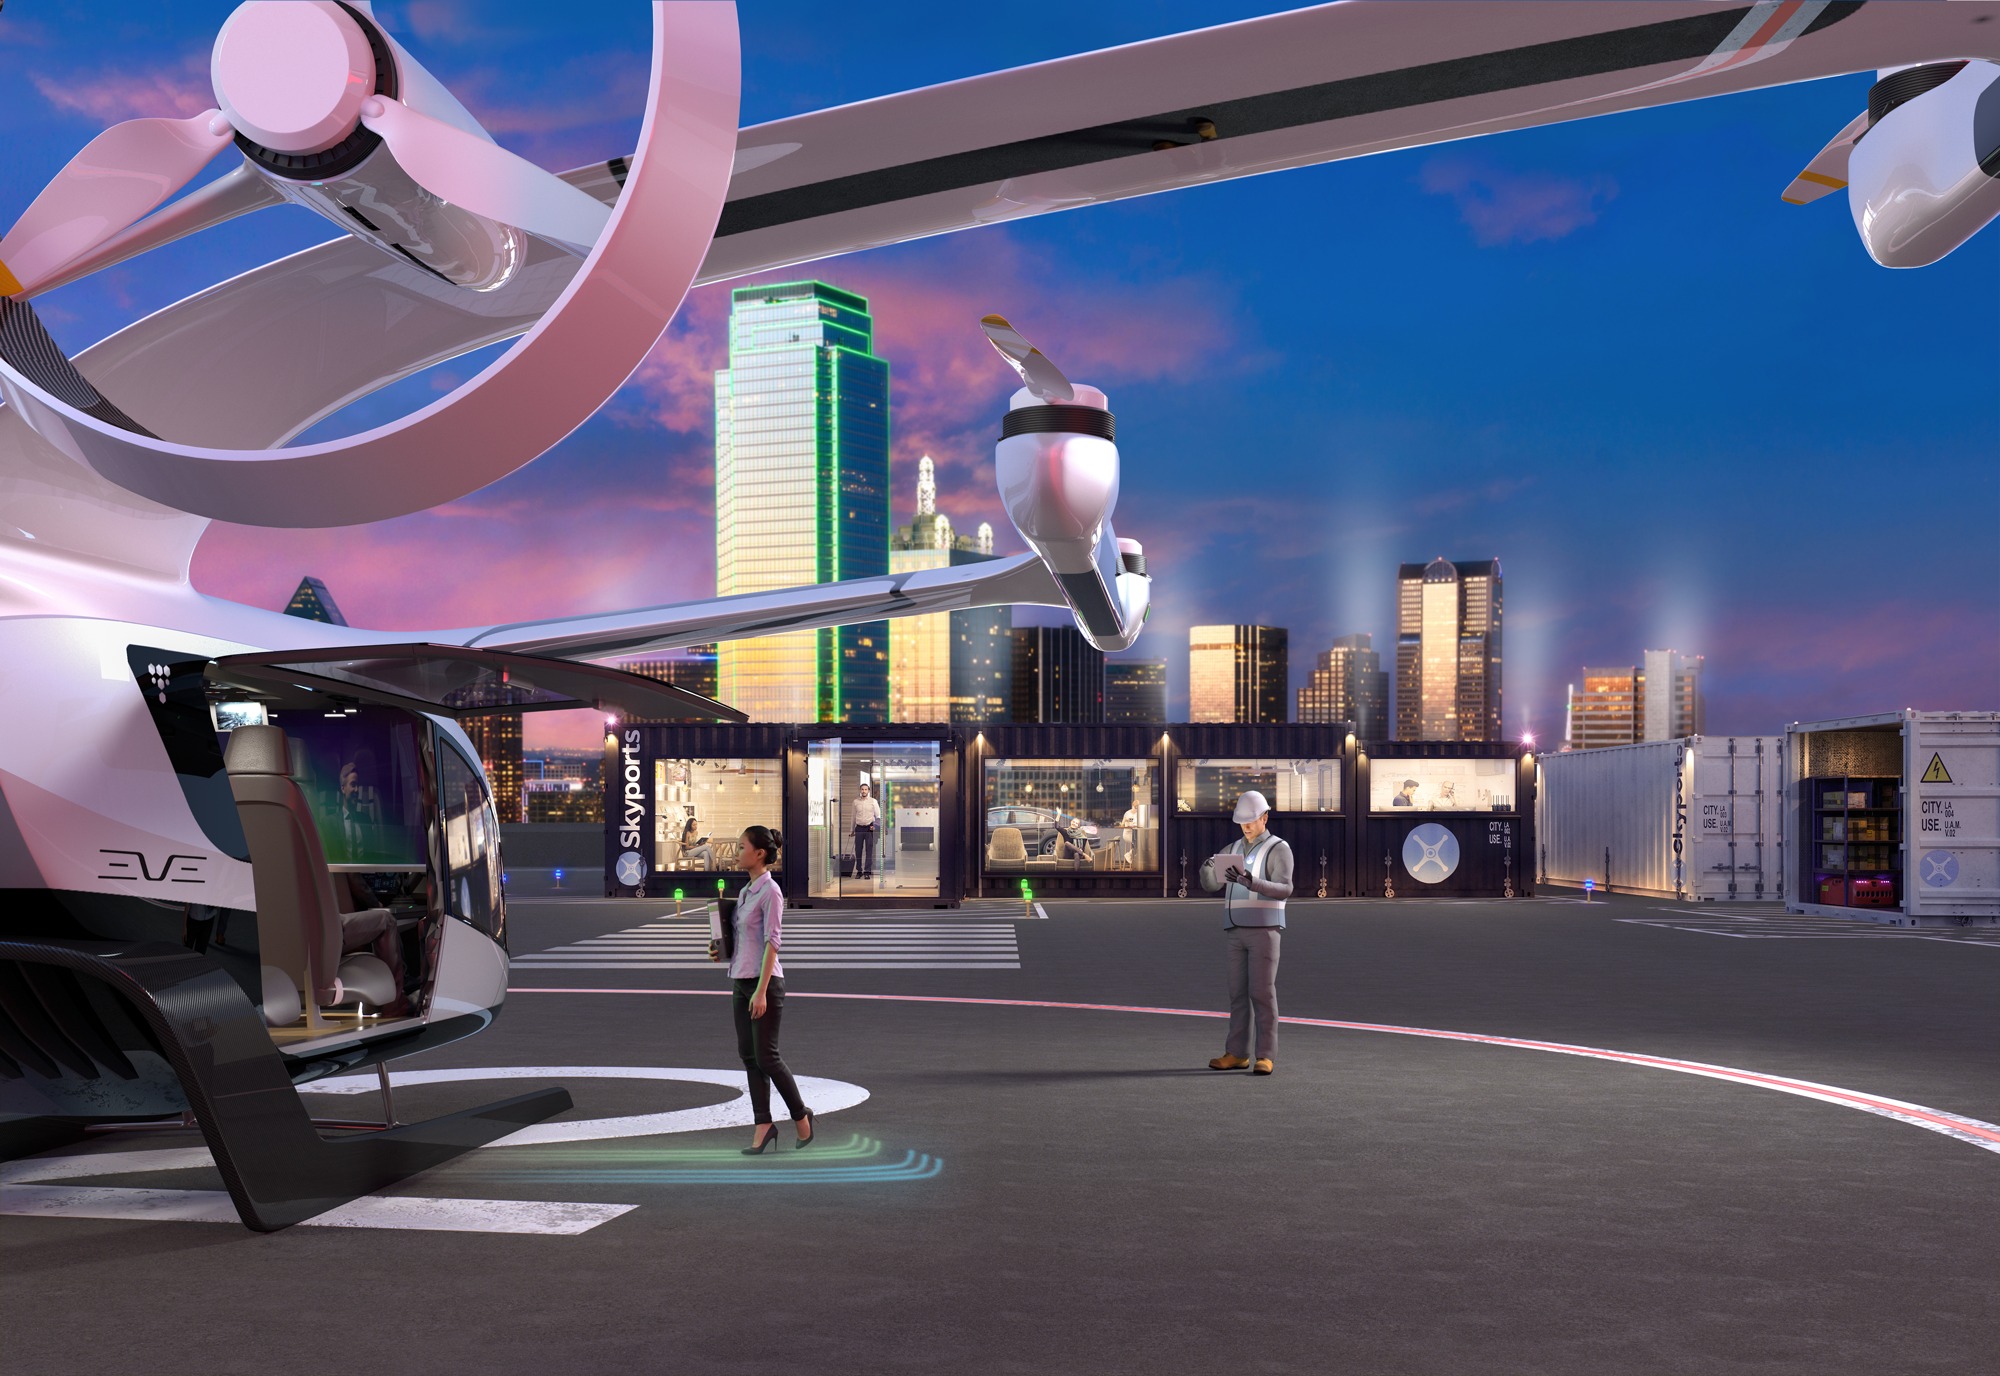 Eve and Skyports collaborate to develop innovative urban air mobility solutions  in Asia and the Americas